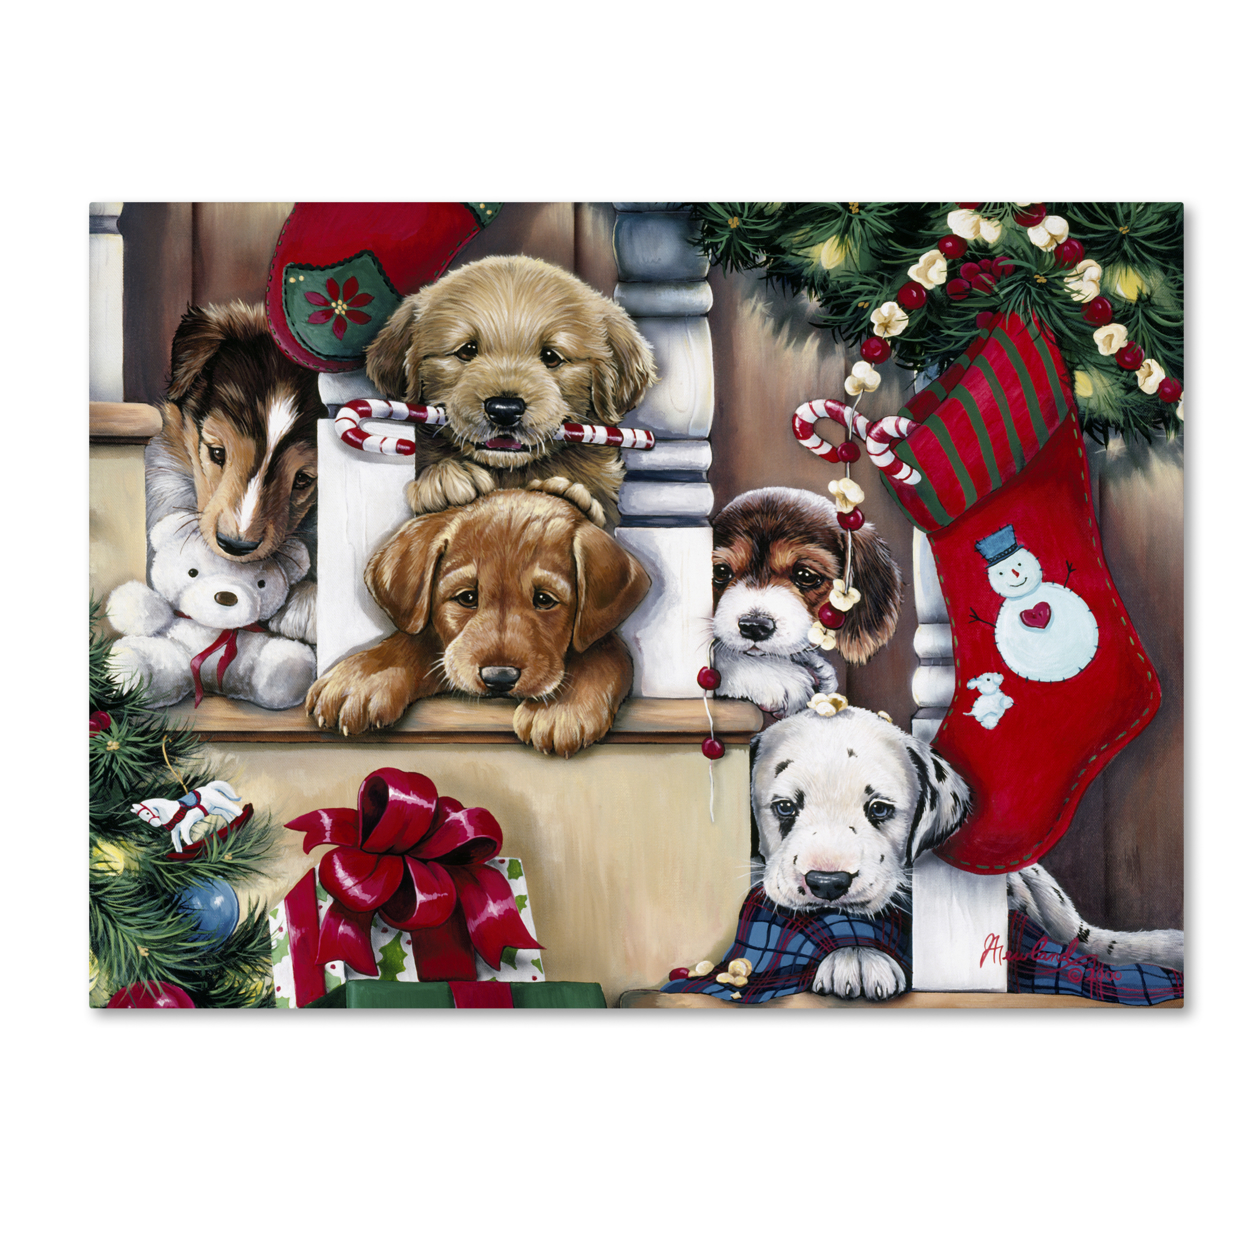 Jenny Newland 'Christmas Puppies On The Loose' Canvas Wall Art 35 X 47 Inches